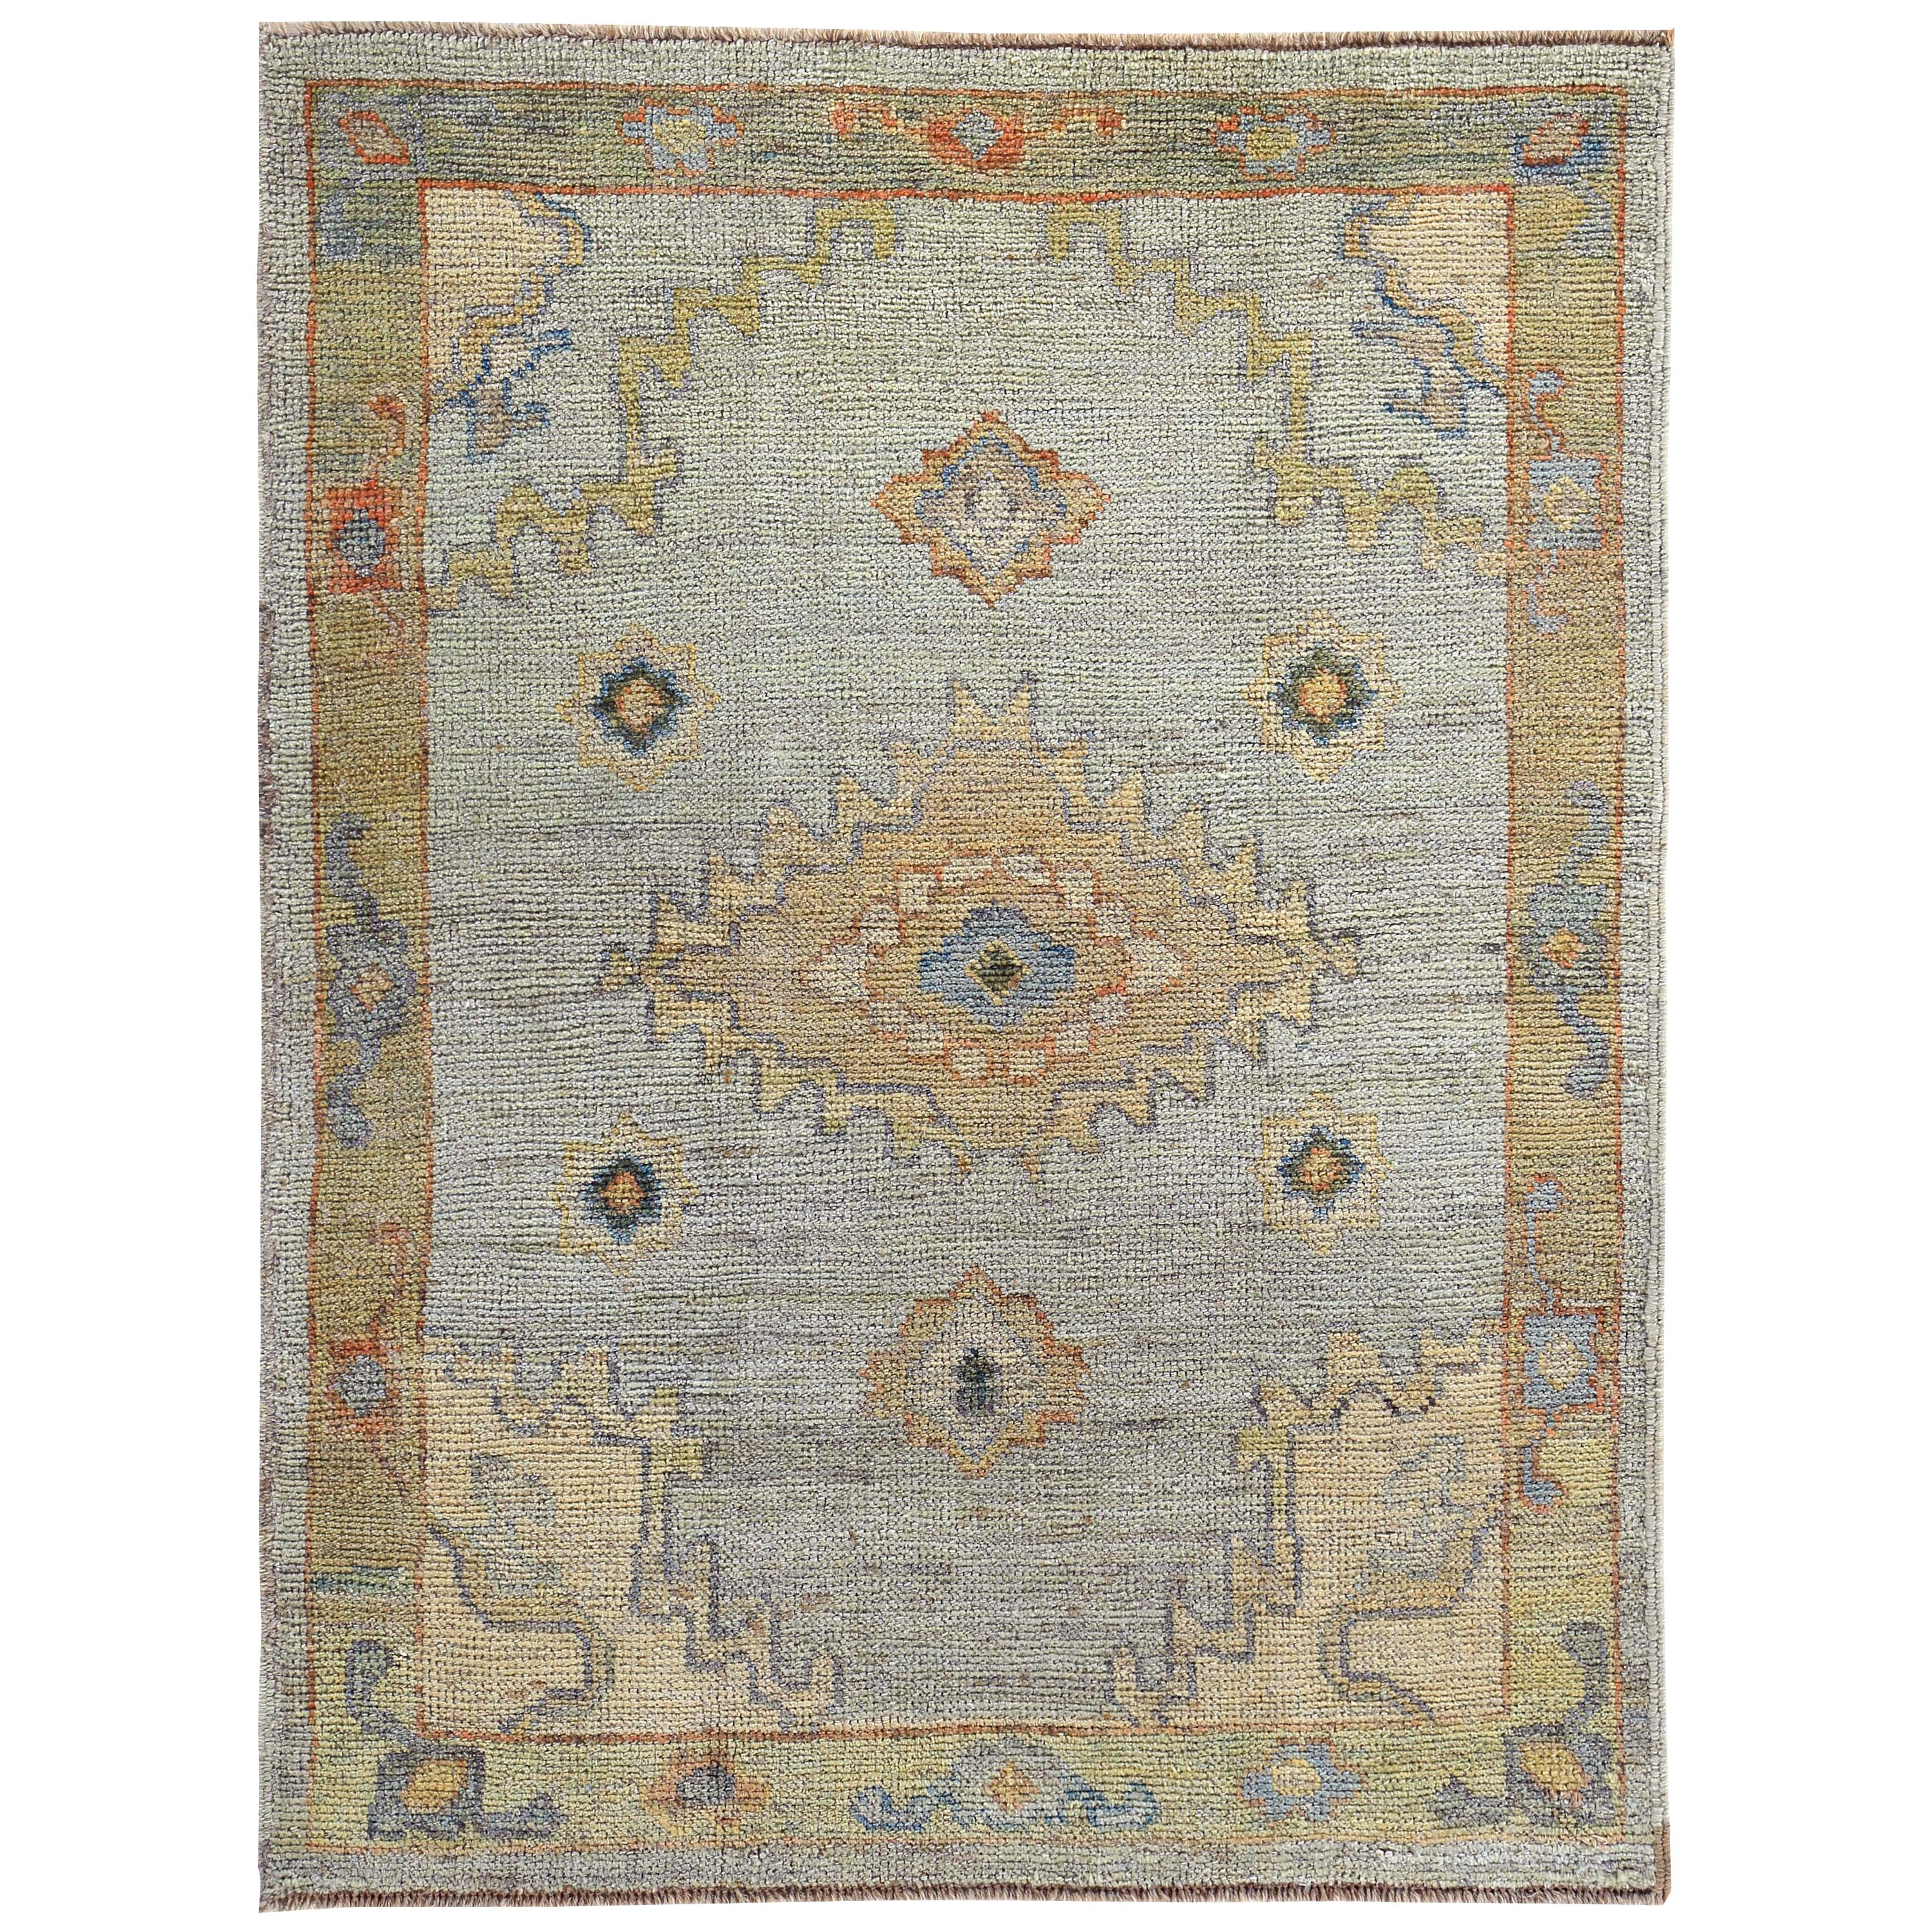 New Turkish Oushak Rug with Yellow, Orange & Green Floral Details on Blue Field For Sale